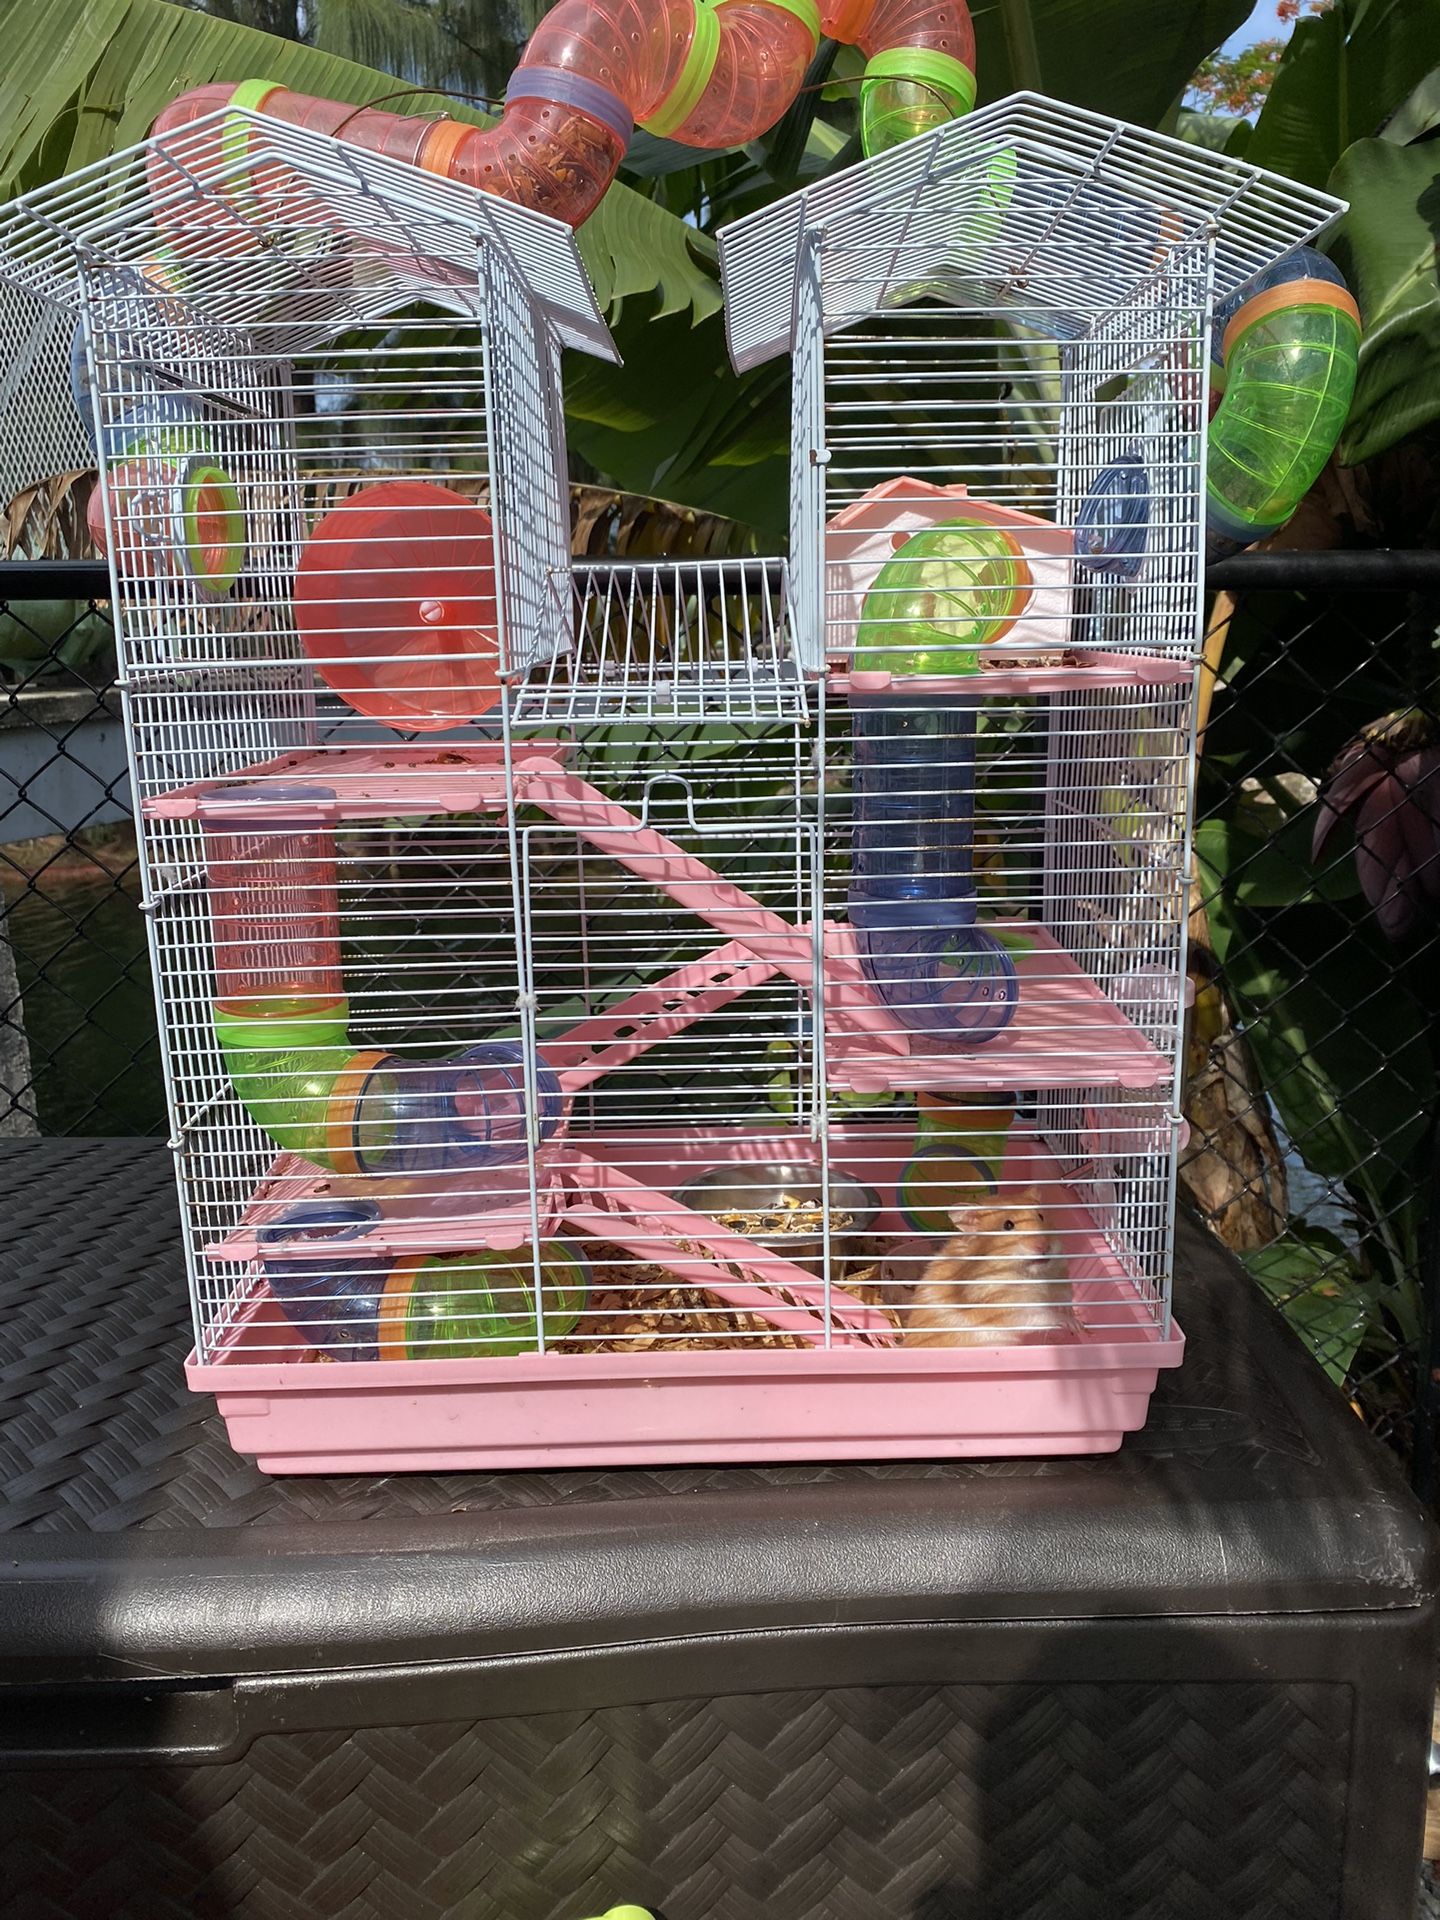 Cage with hamster